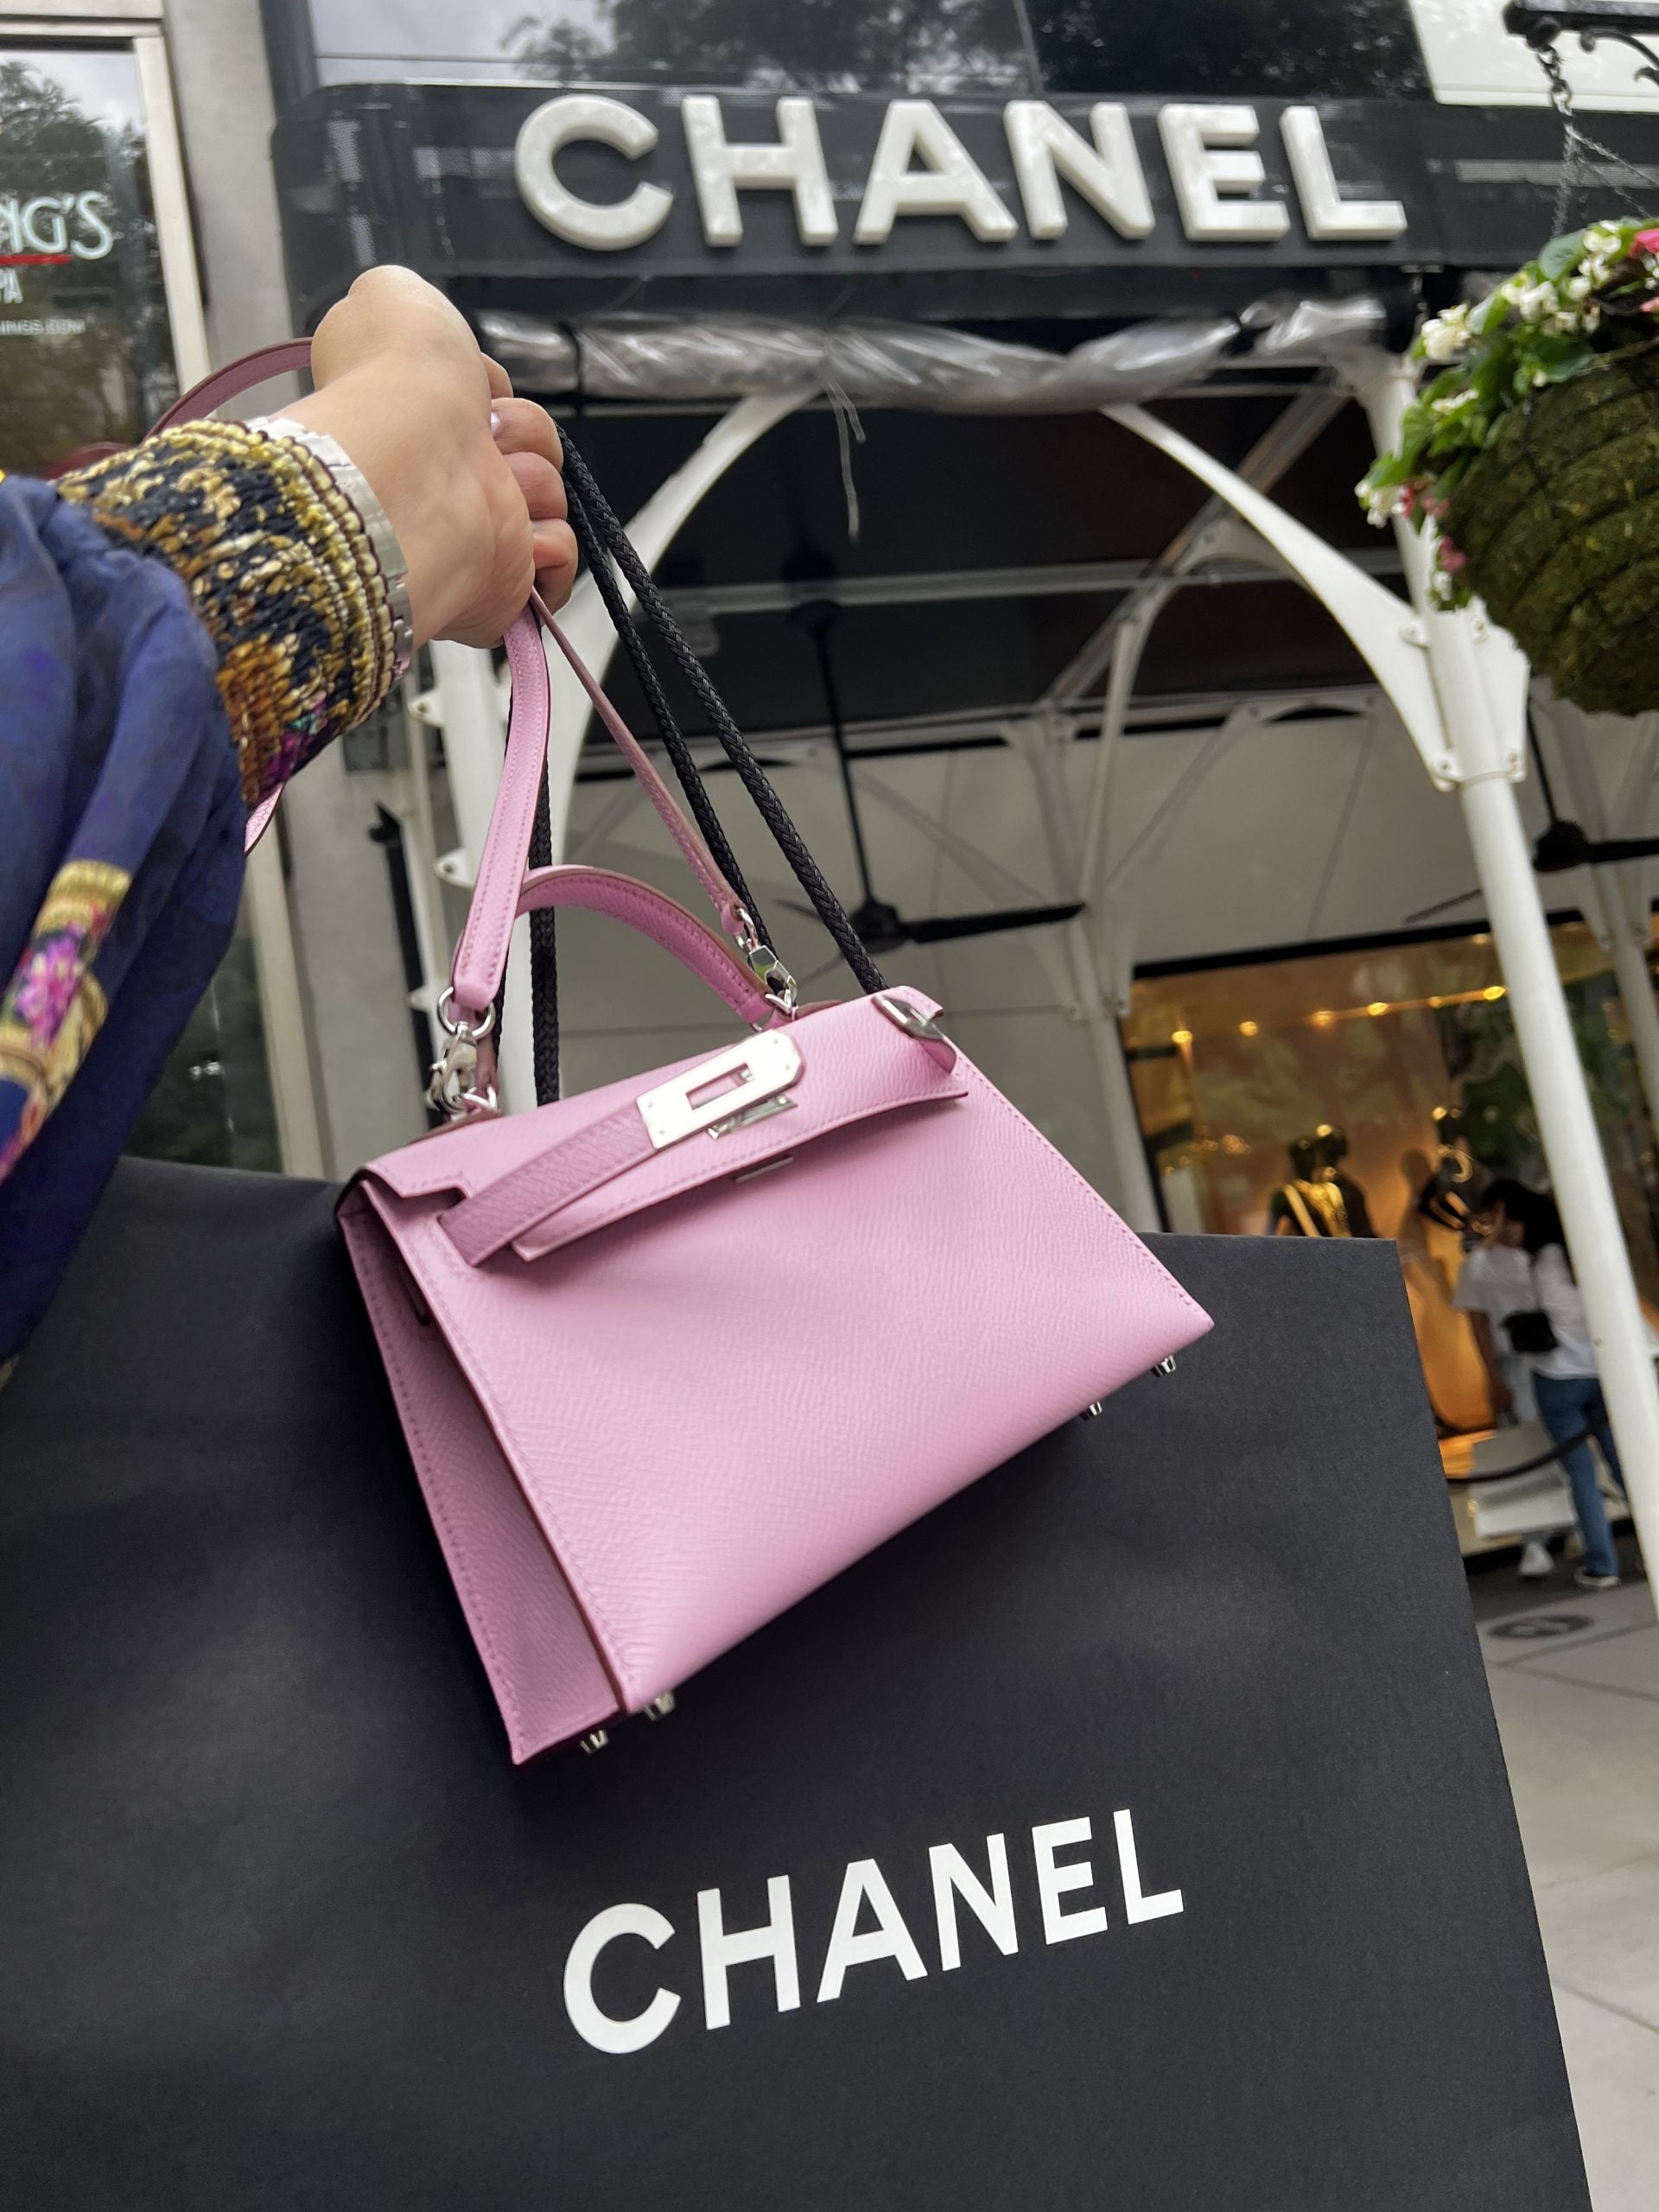 Why Chanel Bags Have Shoppers Frenzied, Fighting to Avoid Price